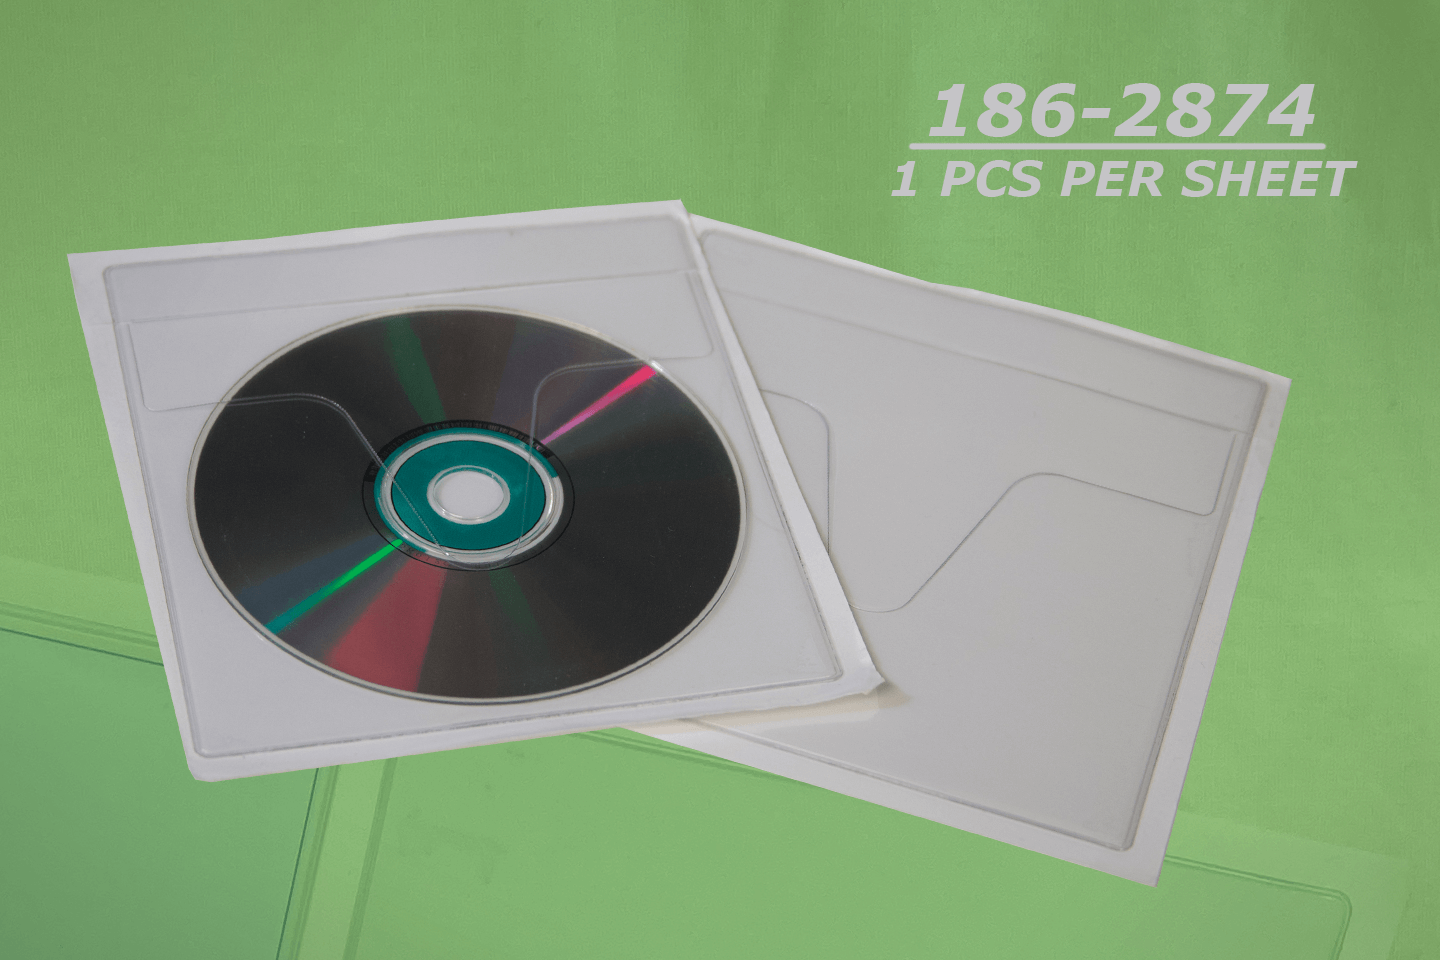 5" x 5" Tamper Evident Adhesive CD Pouch